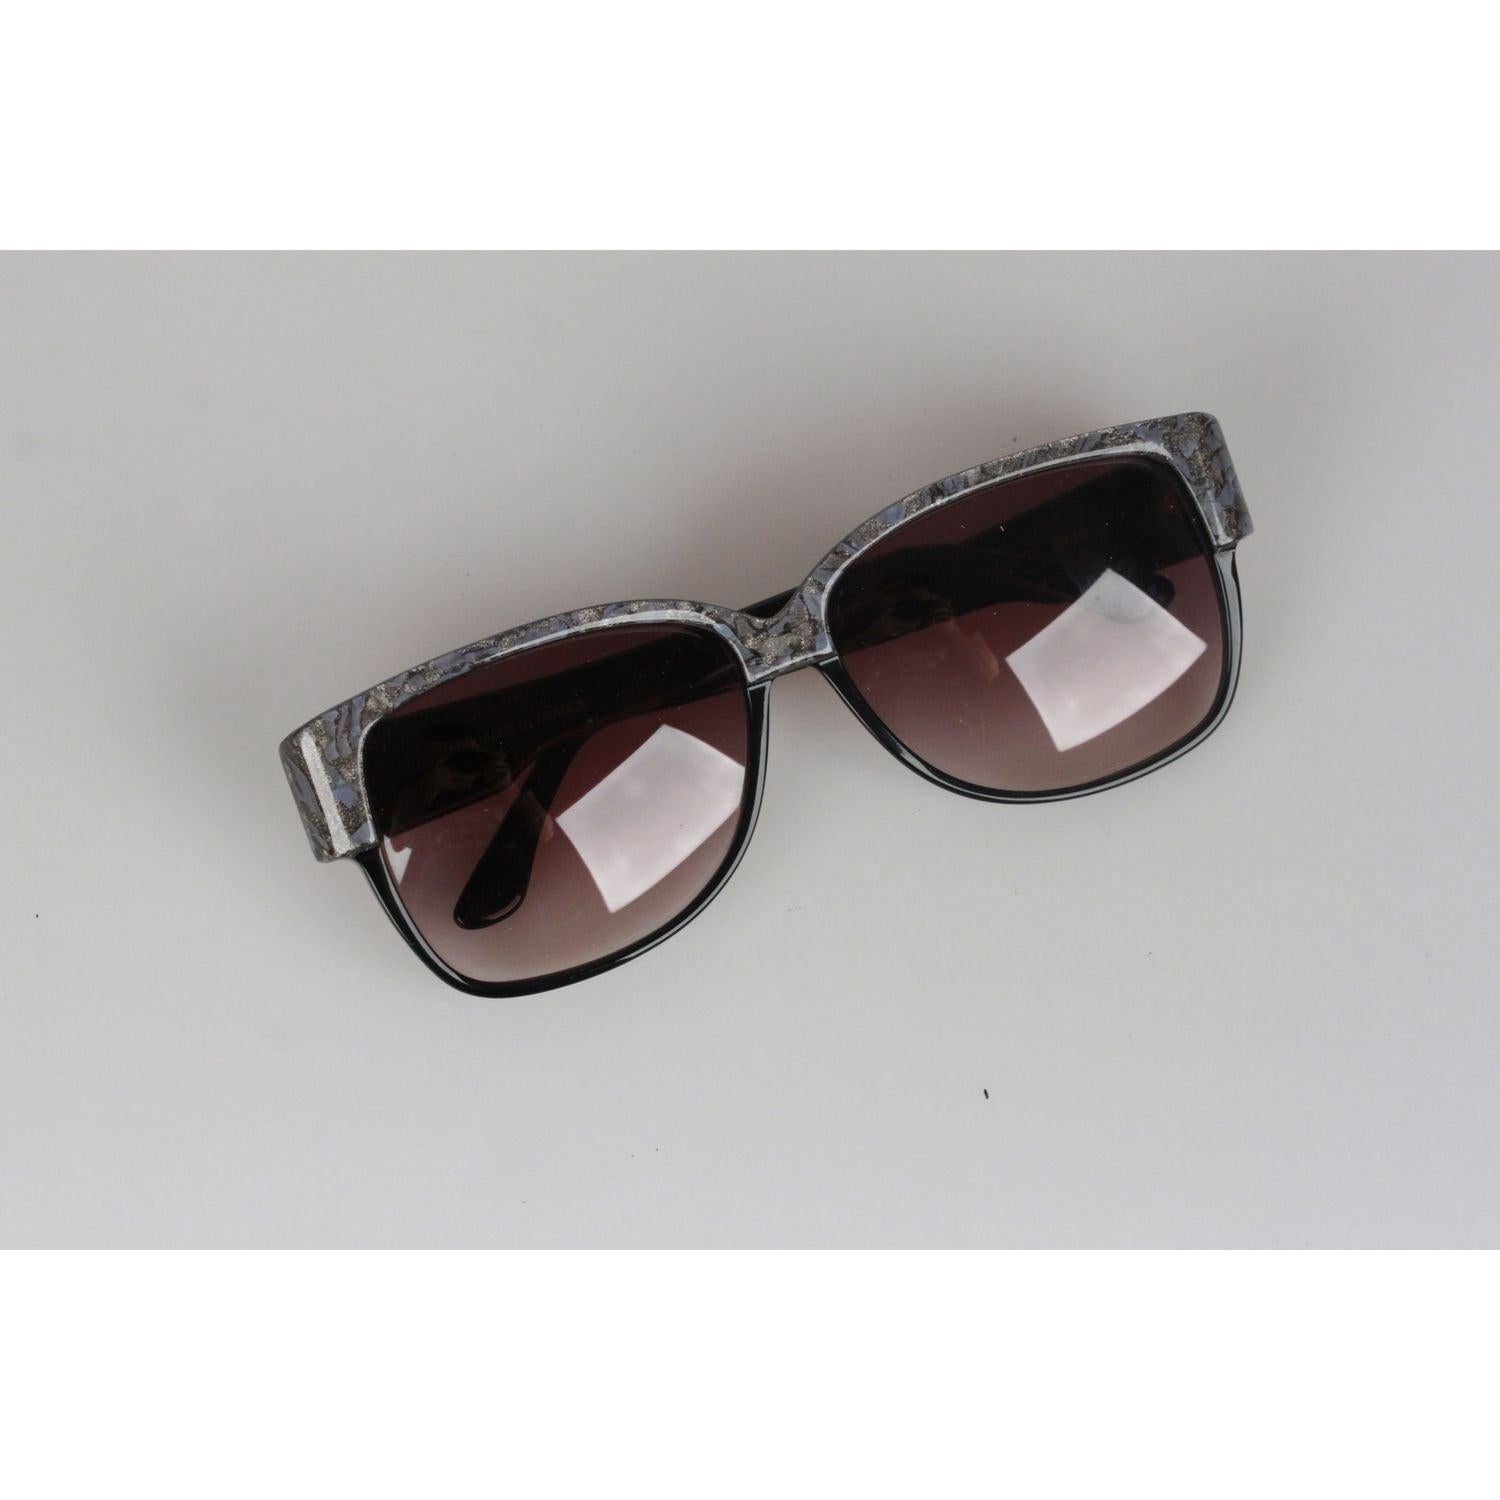 Emilio Pucci Vintage Black Rectangle Sunglasses 88020 EP75 60mm In Excellent Condition For Sale In Rome, Rome